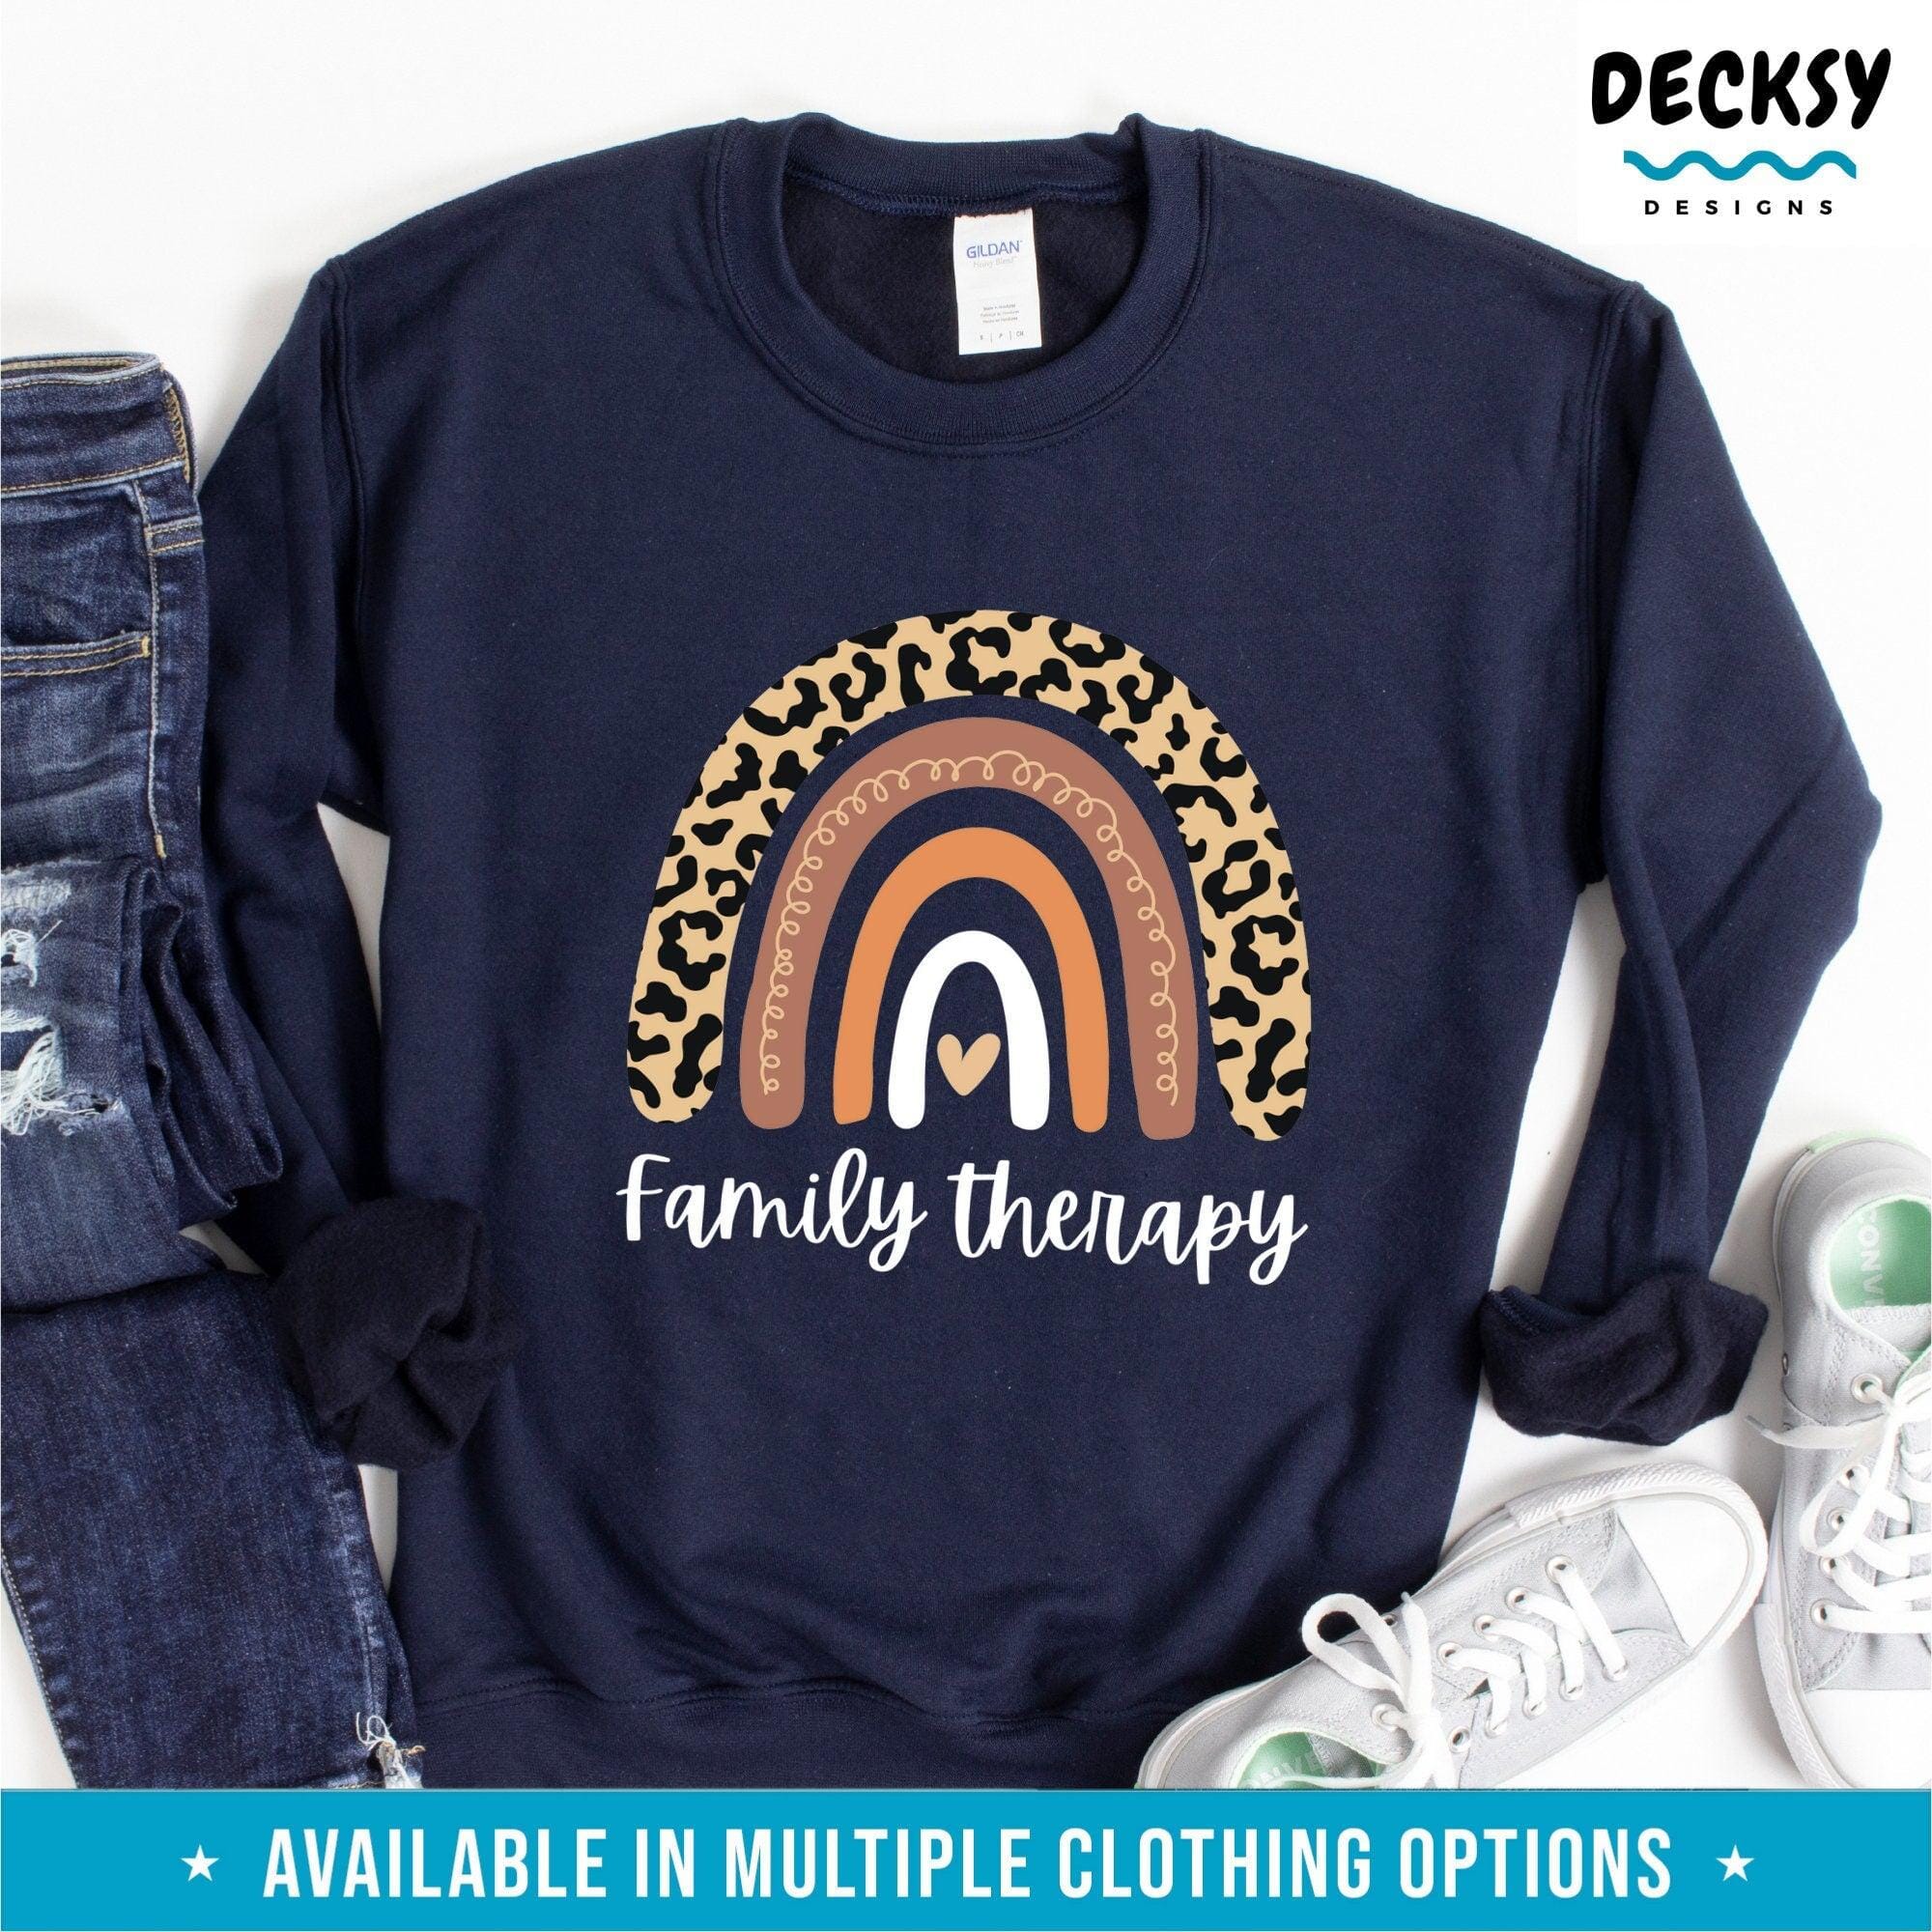 Family Therapy Shirt, Therapist Gift-Clothing:Gender-Neutral Adult Clothing:Tops & Tees:T-shirts:Graphic Tees-DecksyDesigns